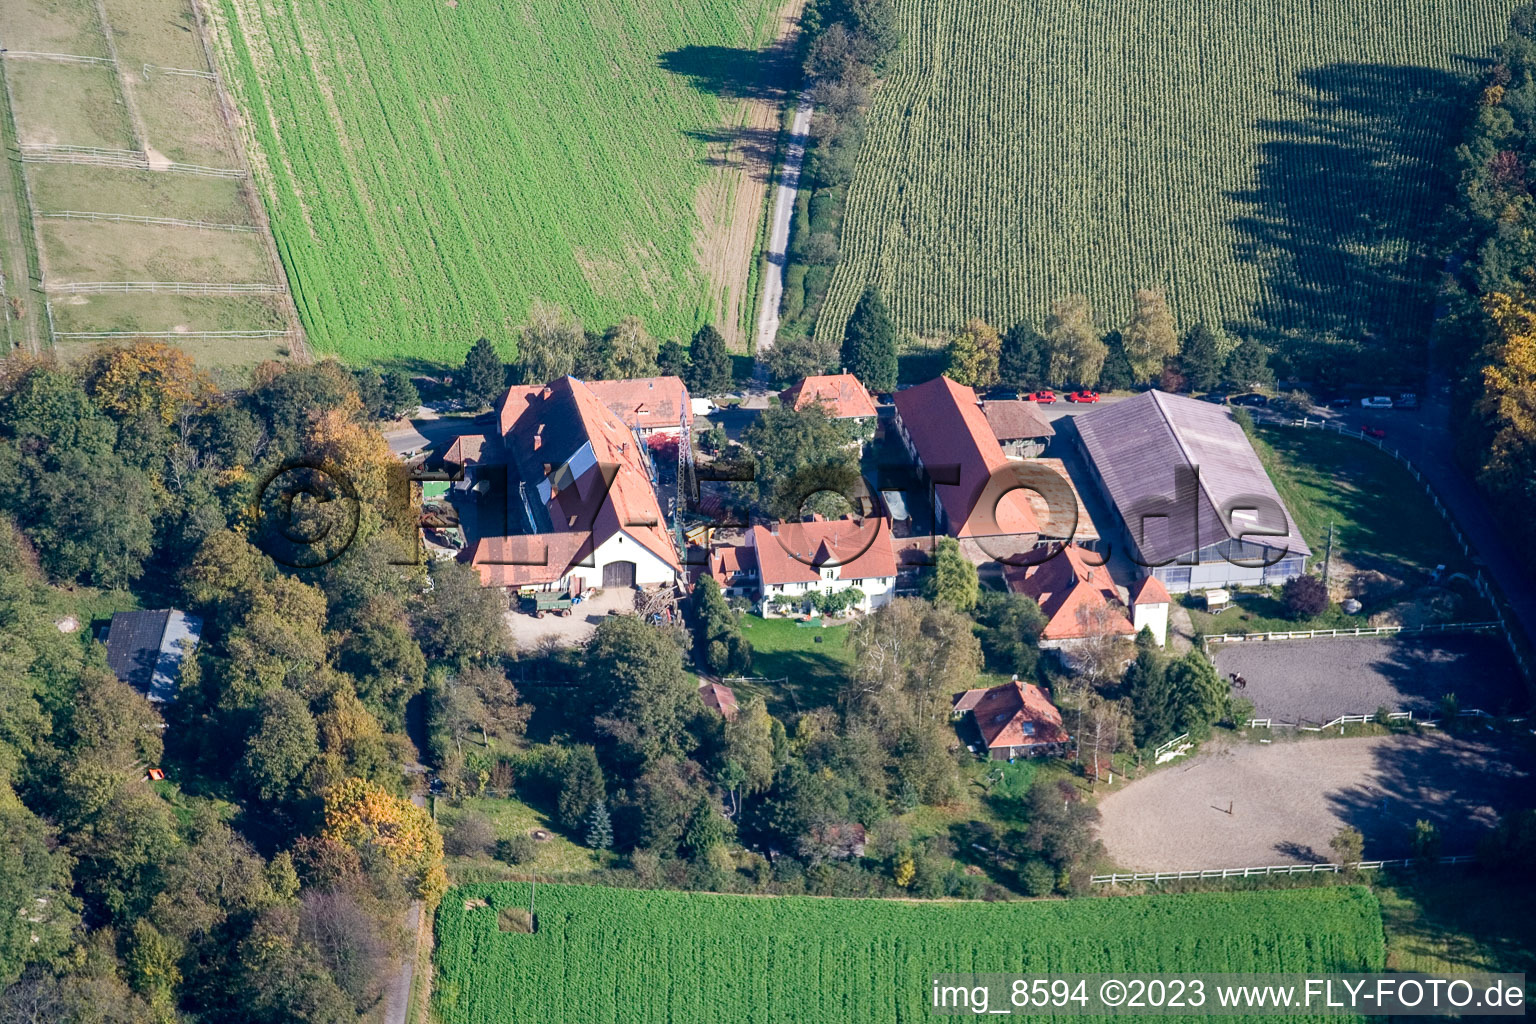 Aerial view of Rittnerthof in the district Grötzingen in Karlsruhe in the state Baden-Wuerttemberg, Germany